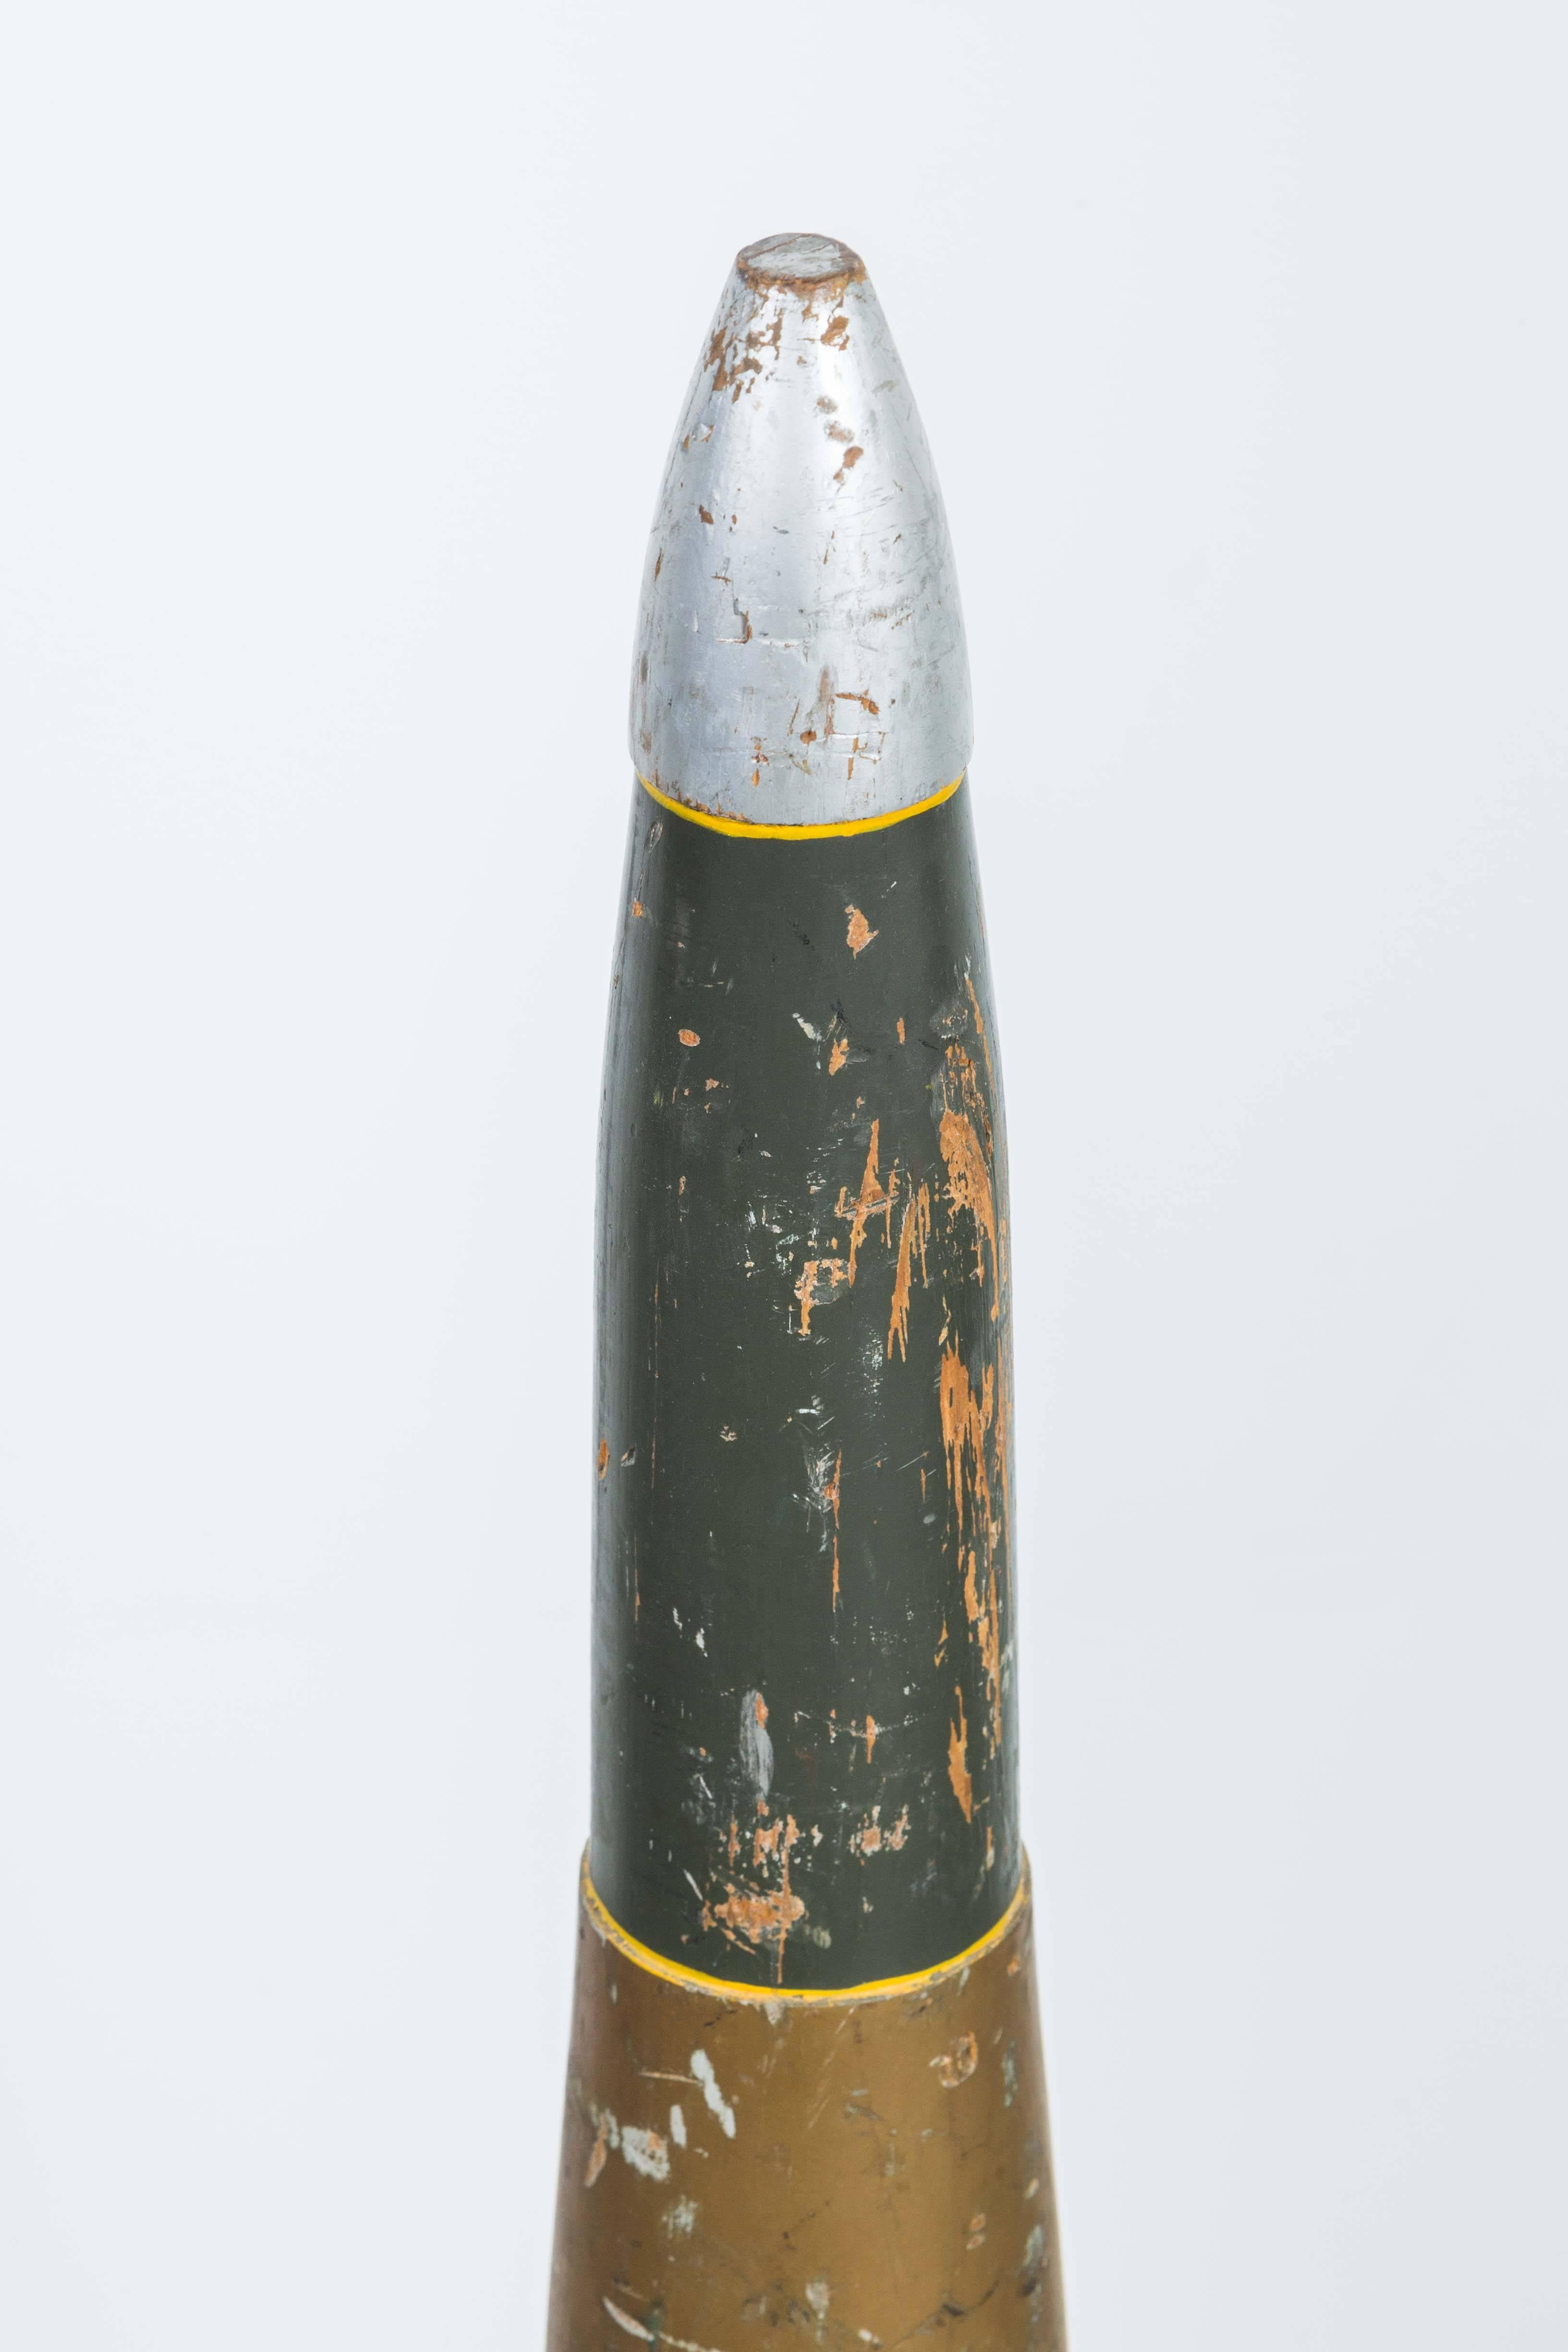 American Collection of Vintage Hand-Painted Artillery Practice Shells